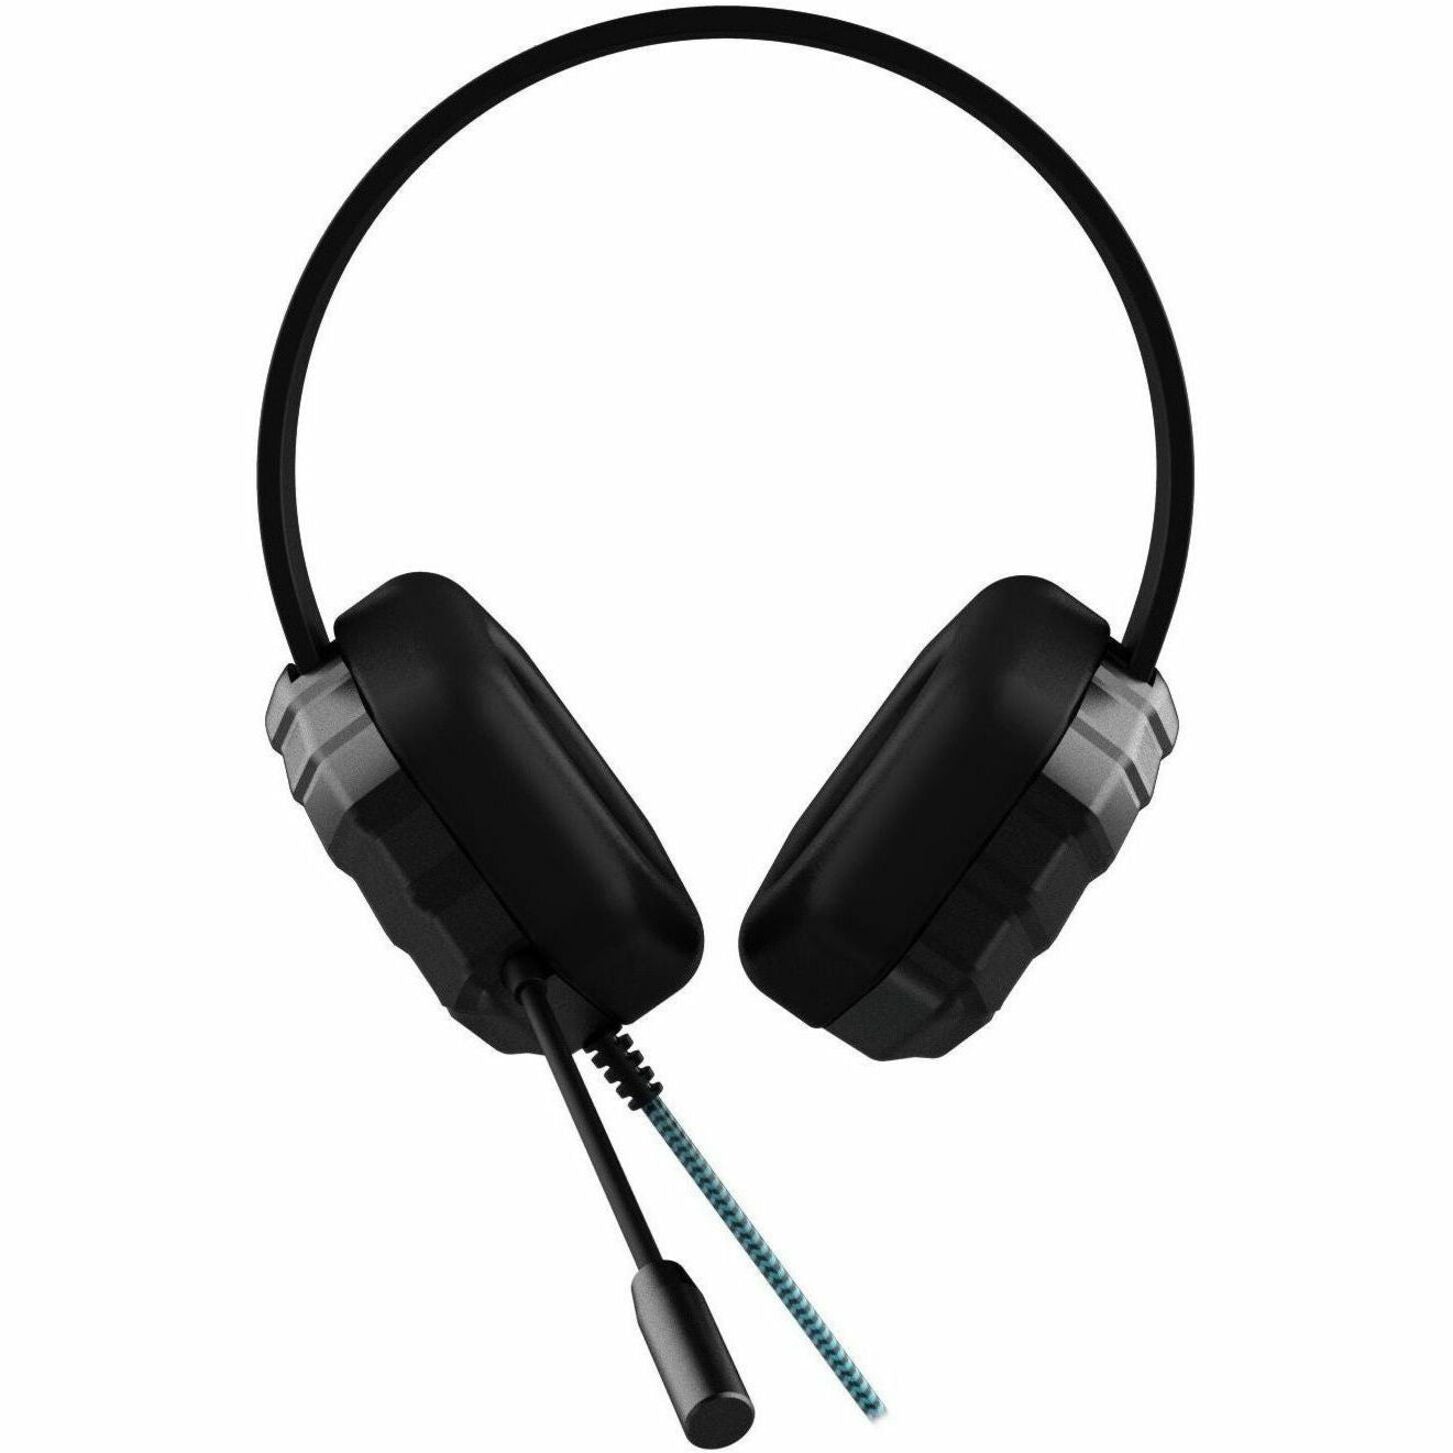 Gumdrop 01H001 DropTech B1 Headsets, Over-the-head Stereo Headset with Boom Microphone, 6 ft Cable Length, Mini-phone (3.5mm) Interface, Black